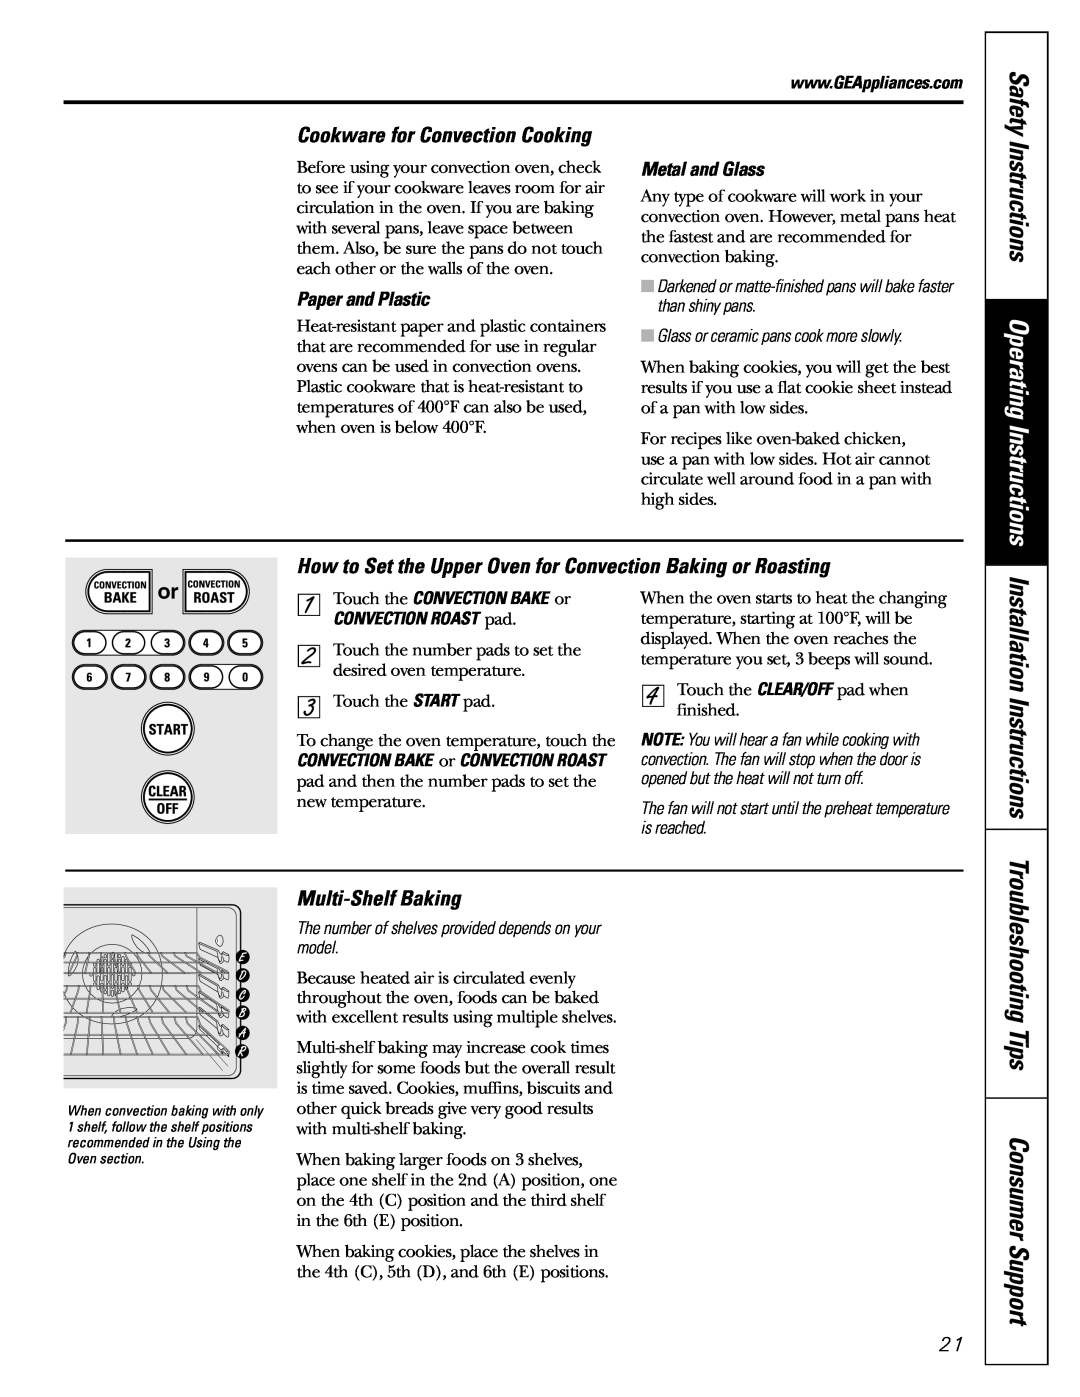 GE JGB918 Installation Instructions, Troubleshooting Tips Consumer Support, Multi-Shelf Baking, Paper and Plastic, Safety 